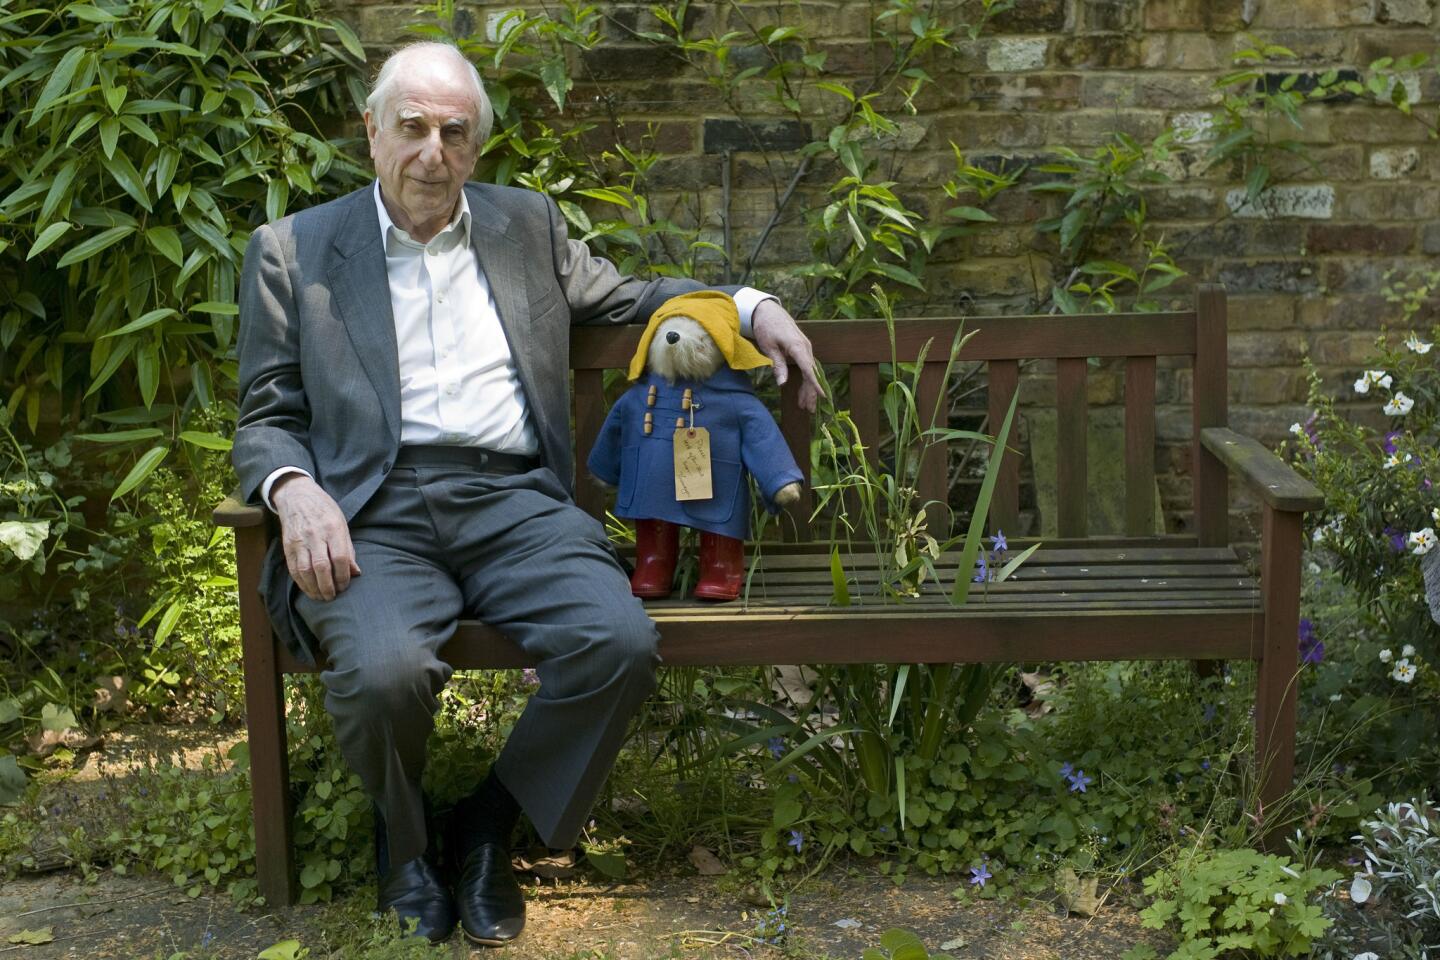 Michael Bond, who created the marmalade-loving teddy Paddington bear, died at the age of 91, his publisher said June 28, 2017. Read more.